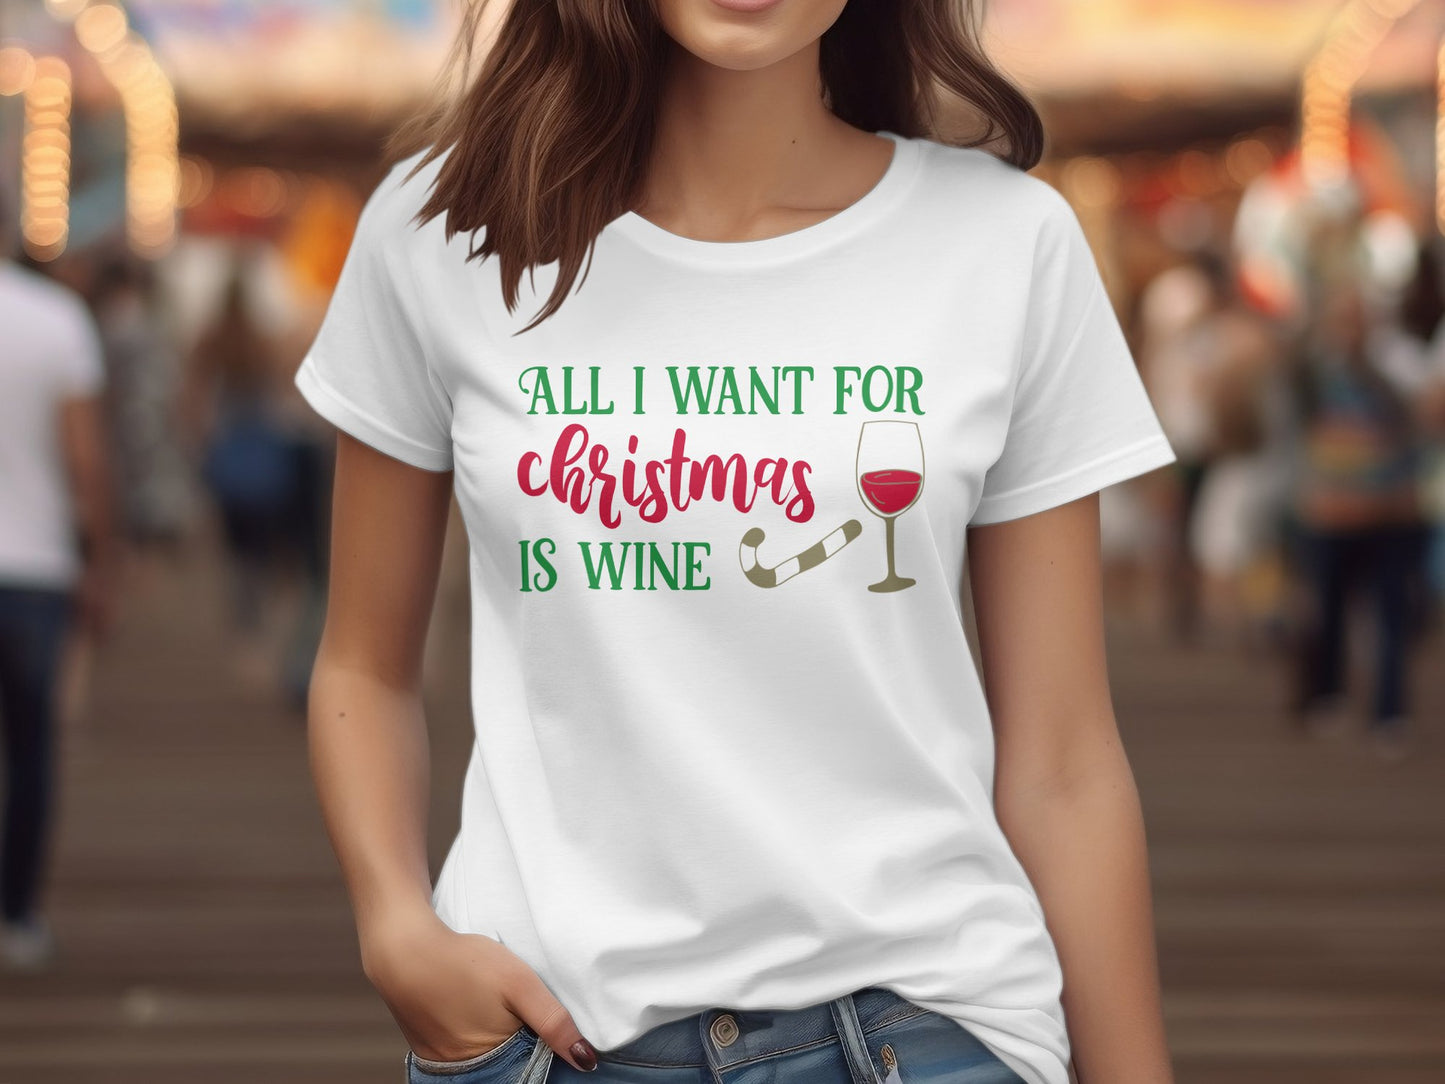 All I want For Christmas is Wine (Christmas T-shirt)